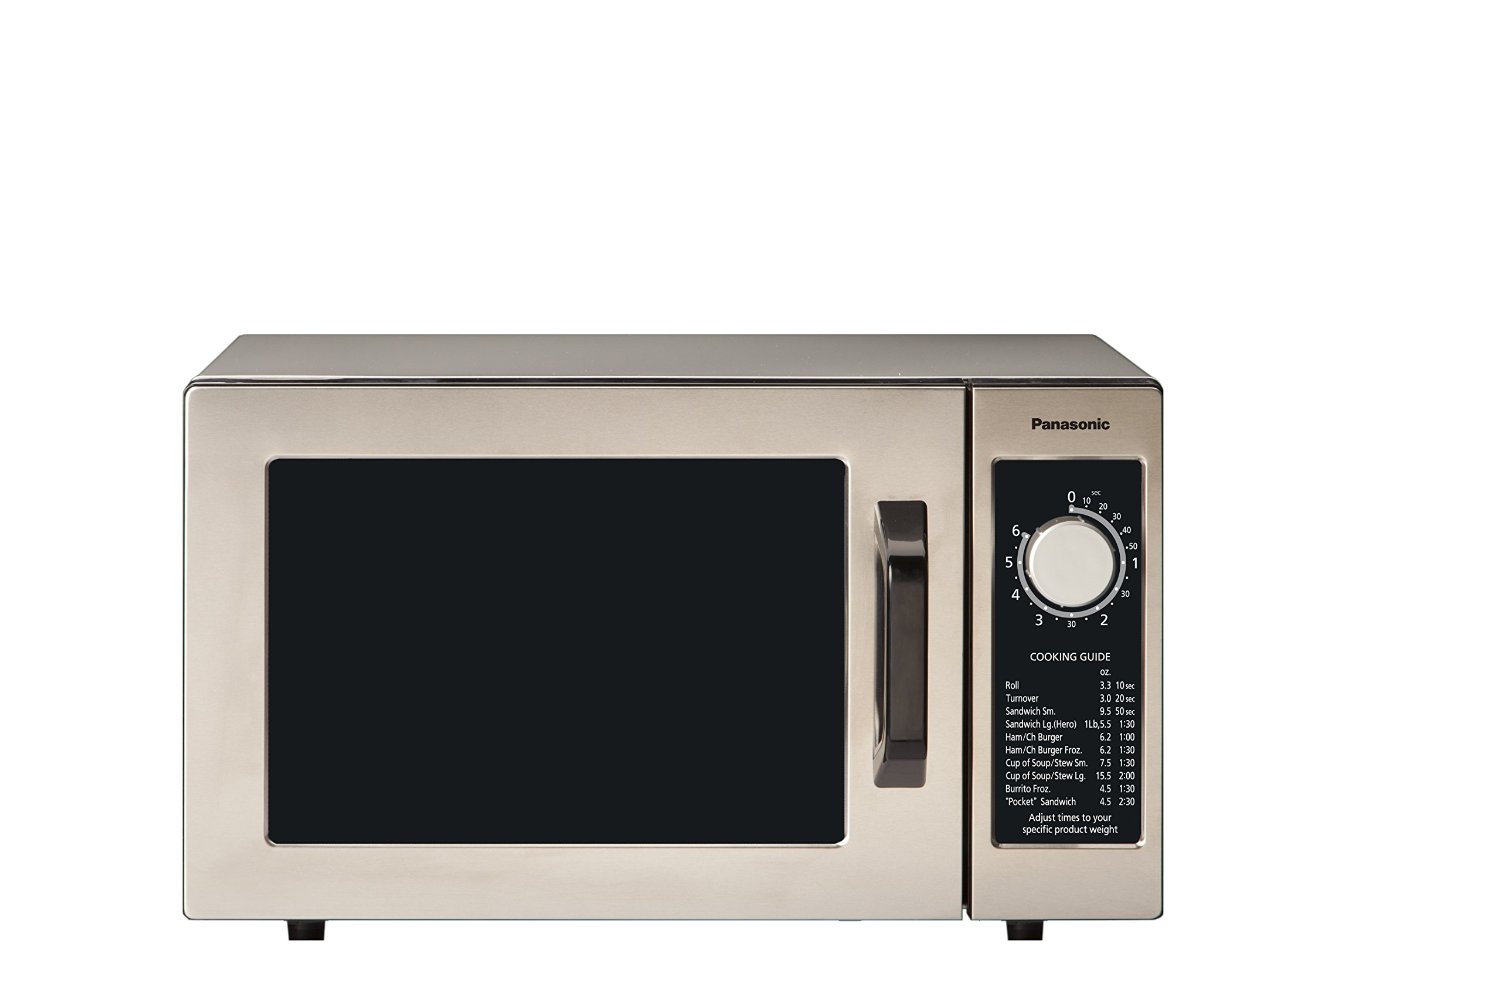 Panasonic NE-1025F Silver 1000W Commercial Microwave Oven